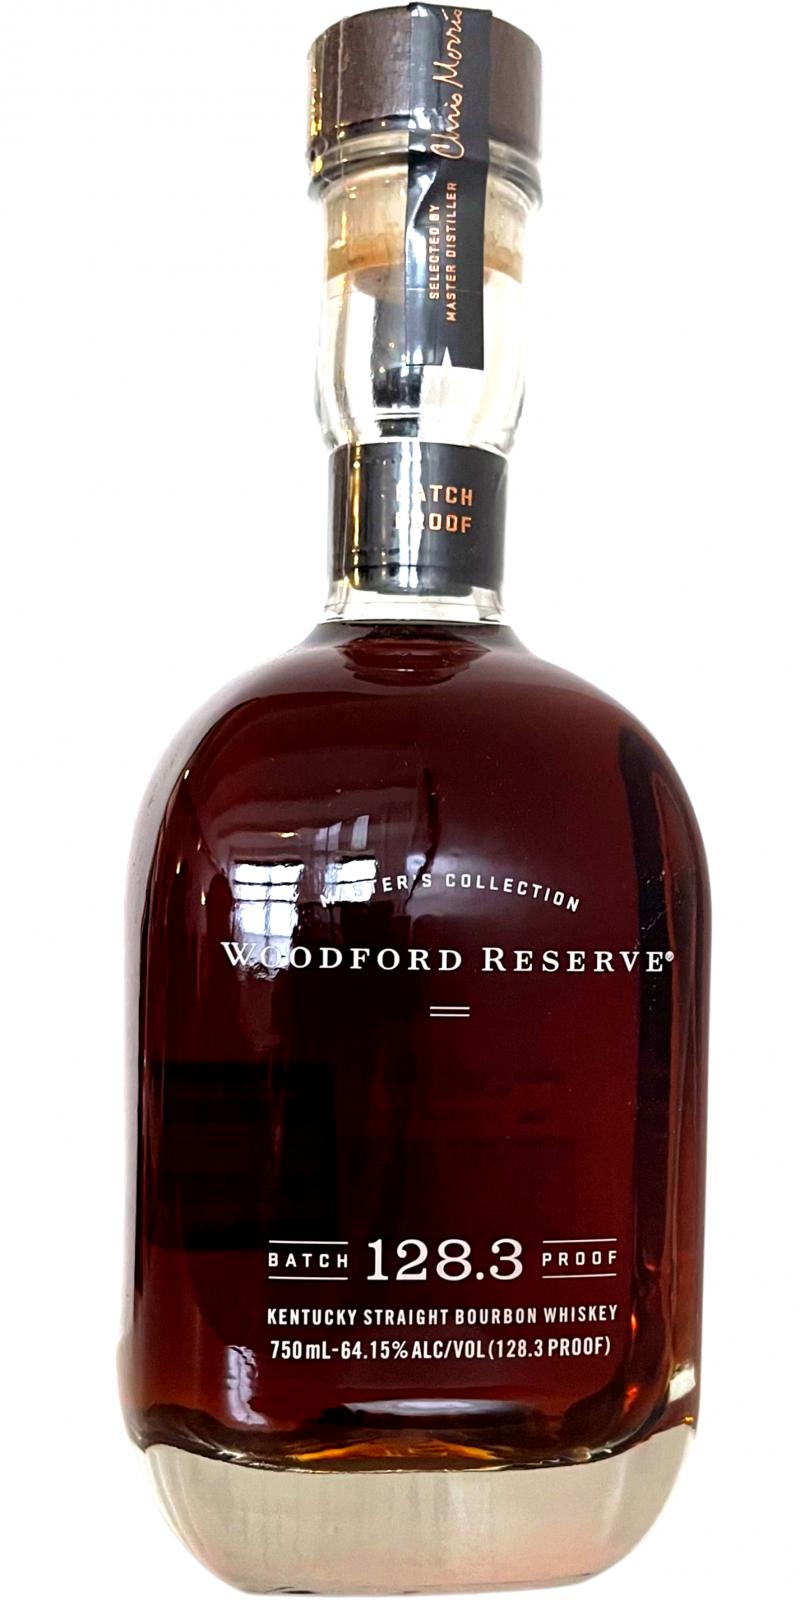 Woodford Reserve Batch Proof Ratings and reviews Whiskybase